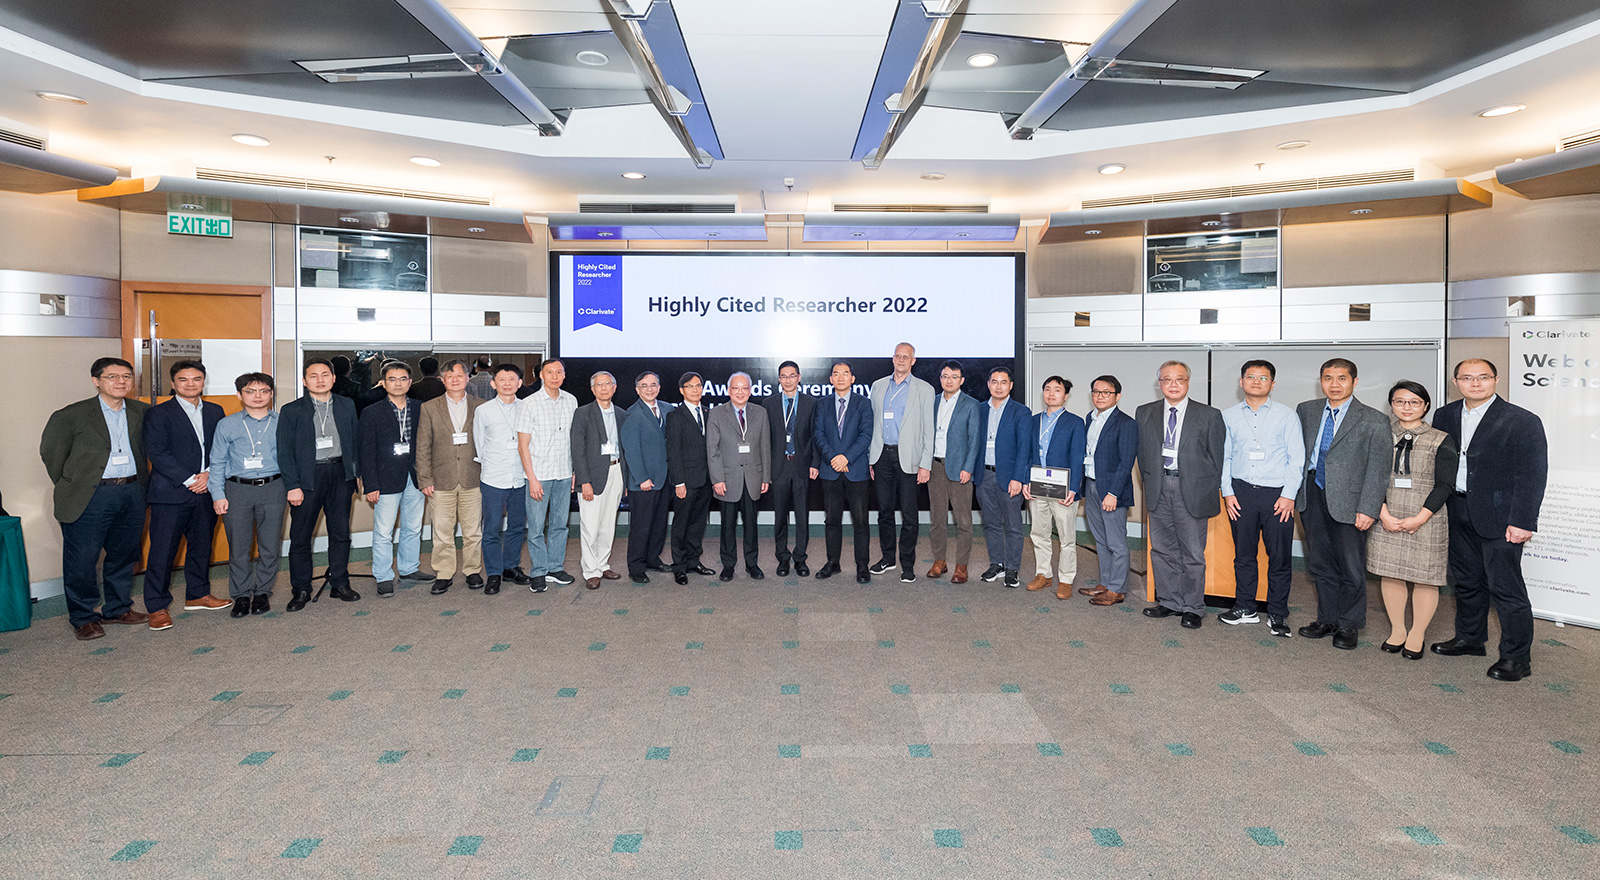 29 CityU scholars are named Highly Cited Researchers for 2022, placing CityU 50th worldwide in this citation ranking.